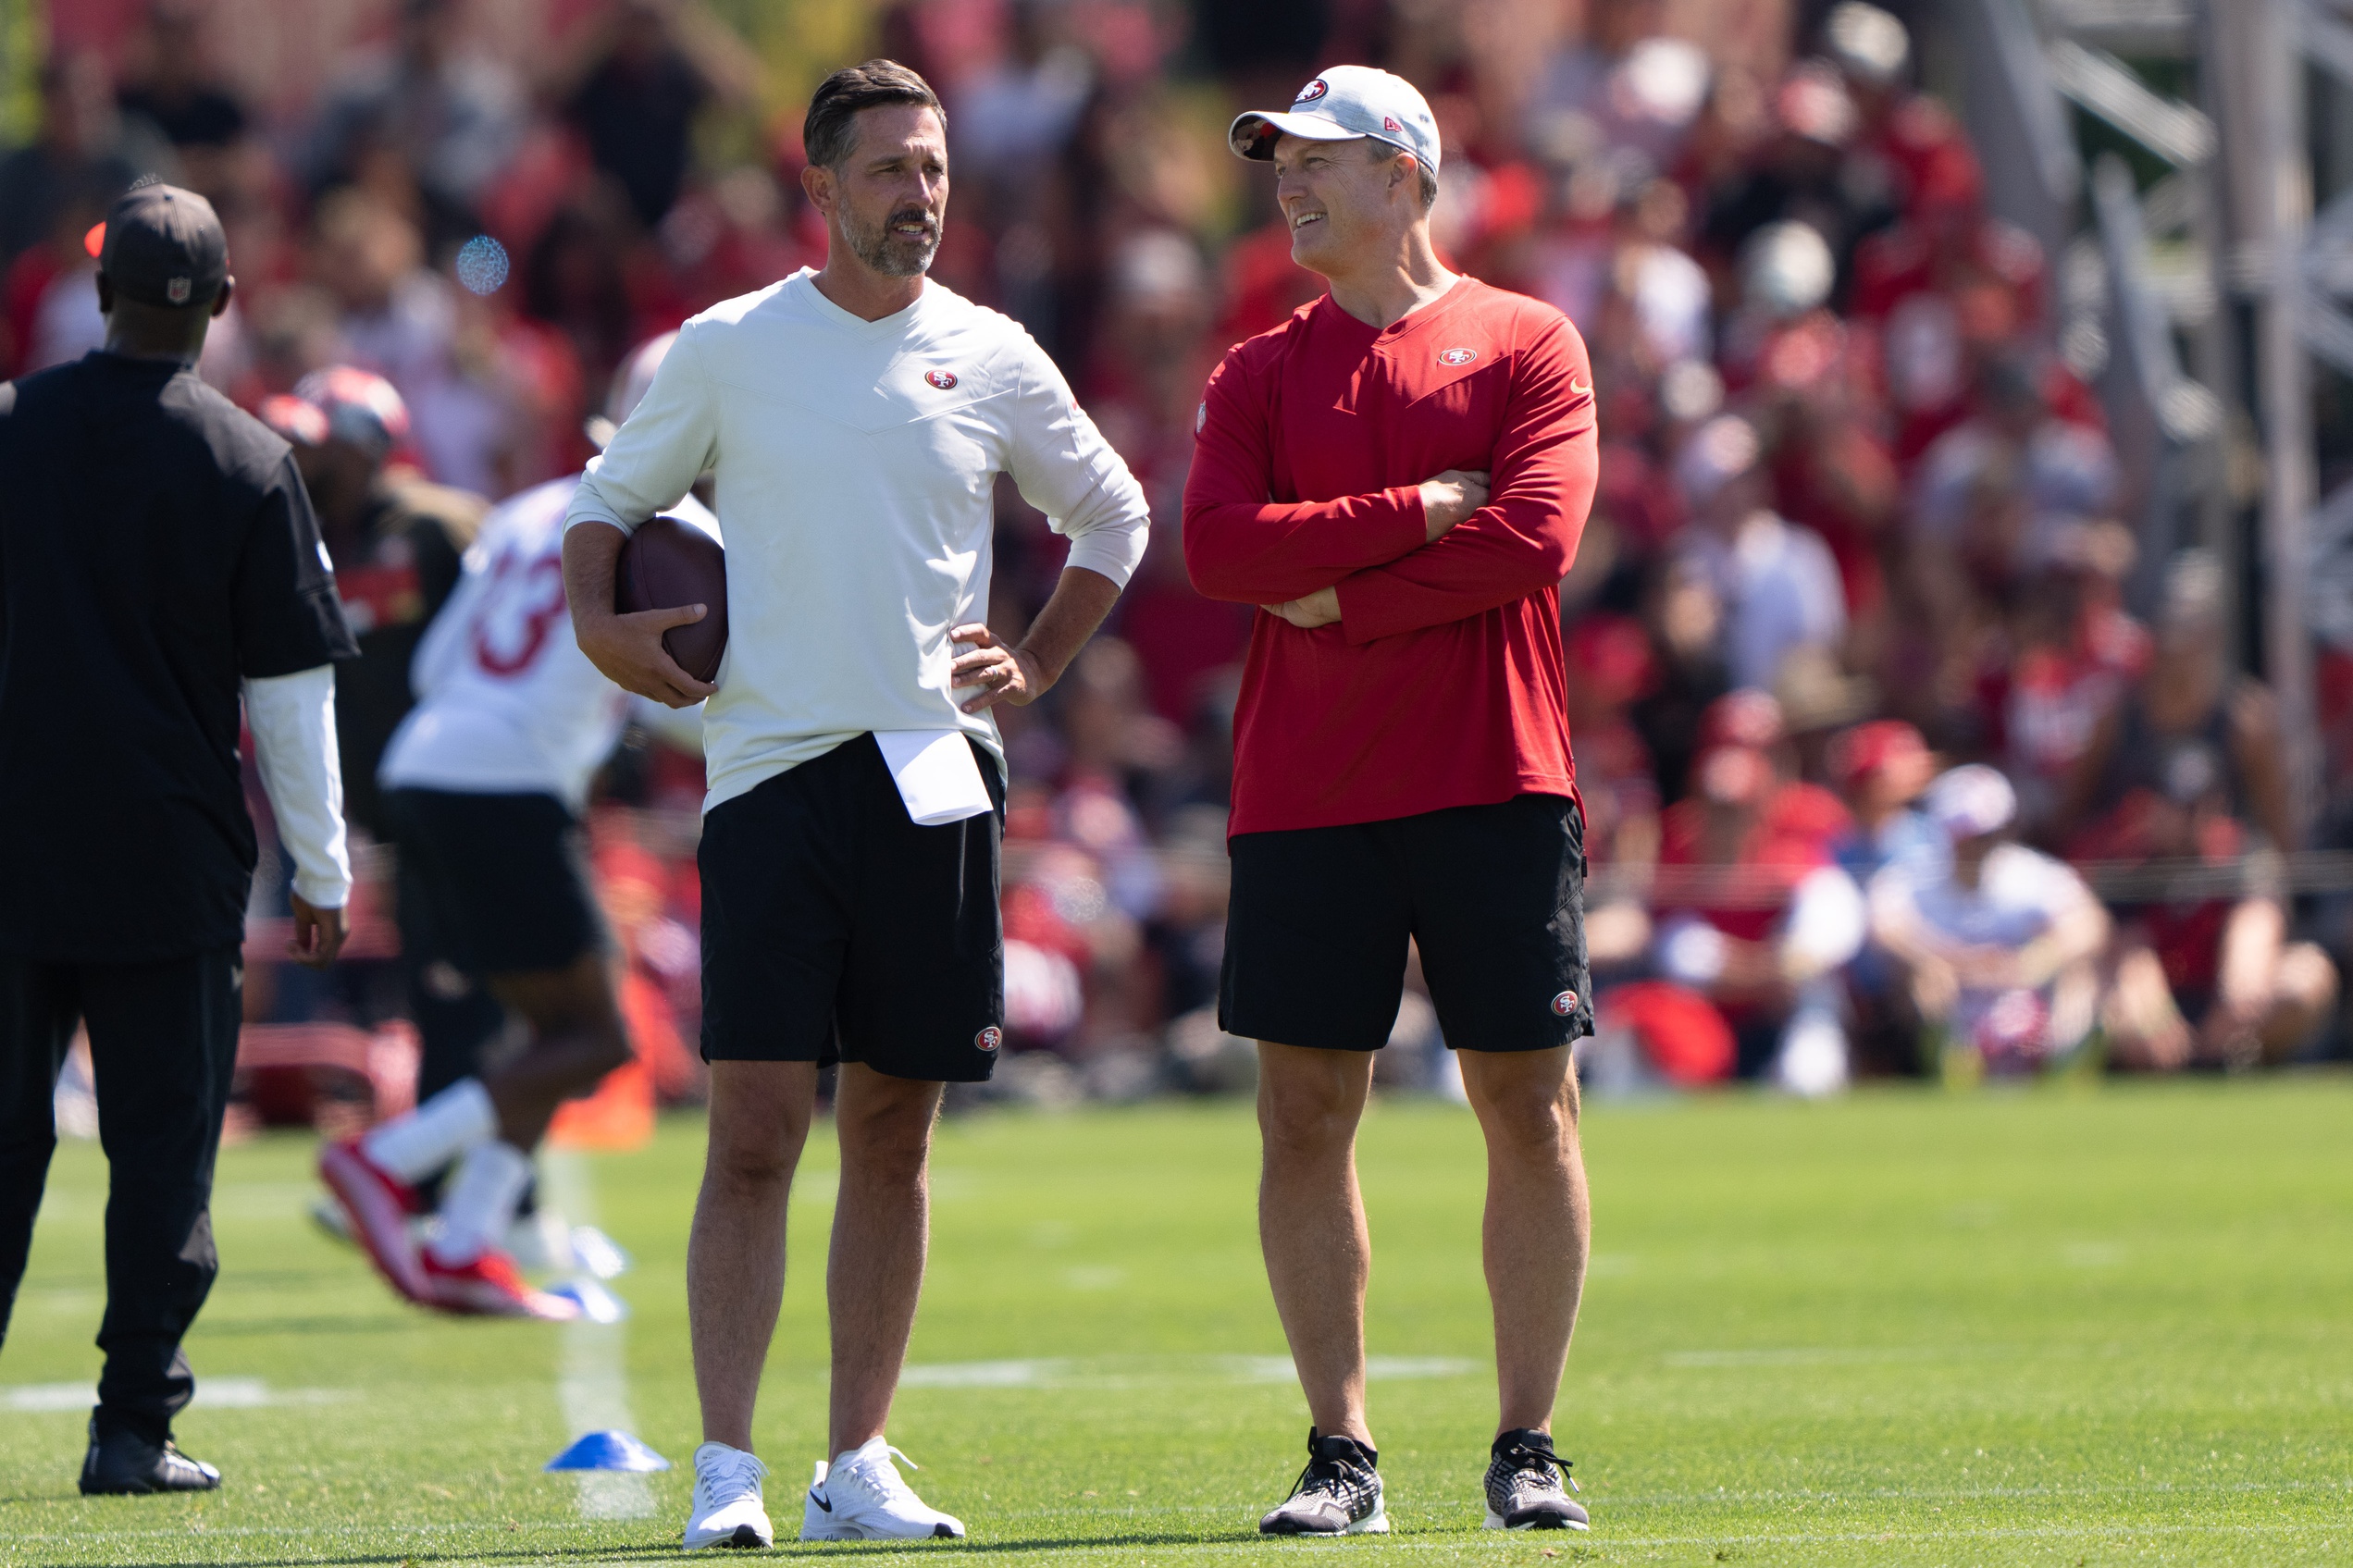 Kyle Shanahan was very interested in drafting Zach Wilson out of college. 